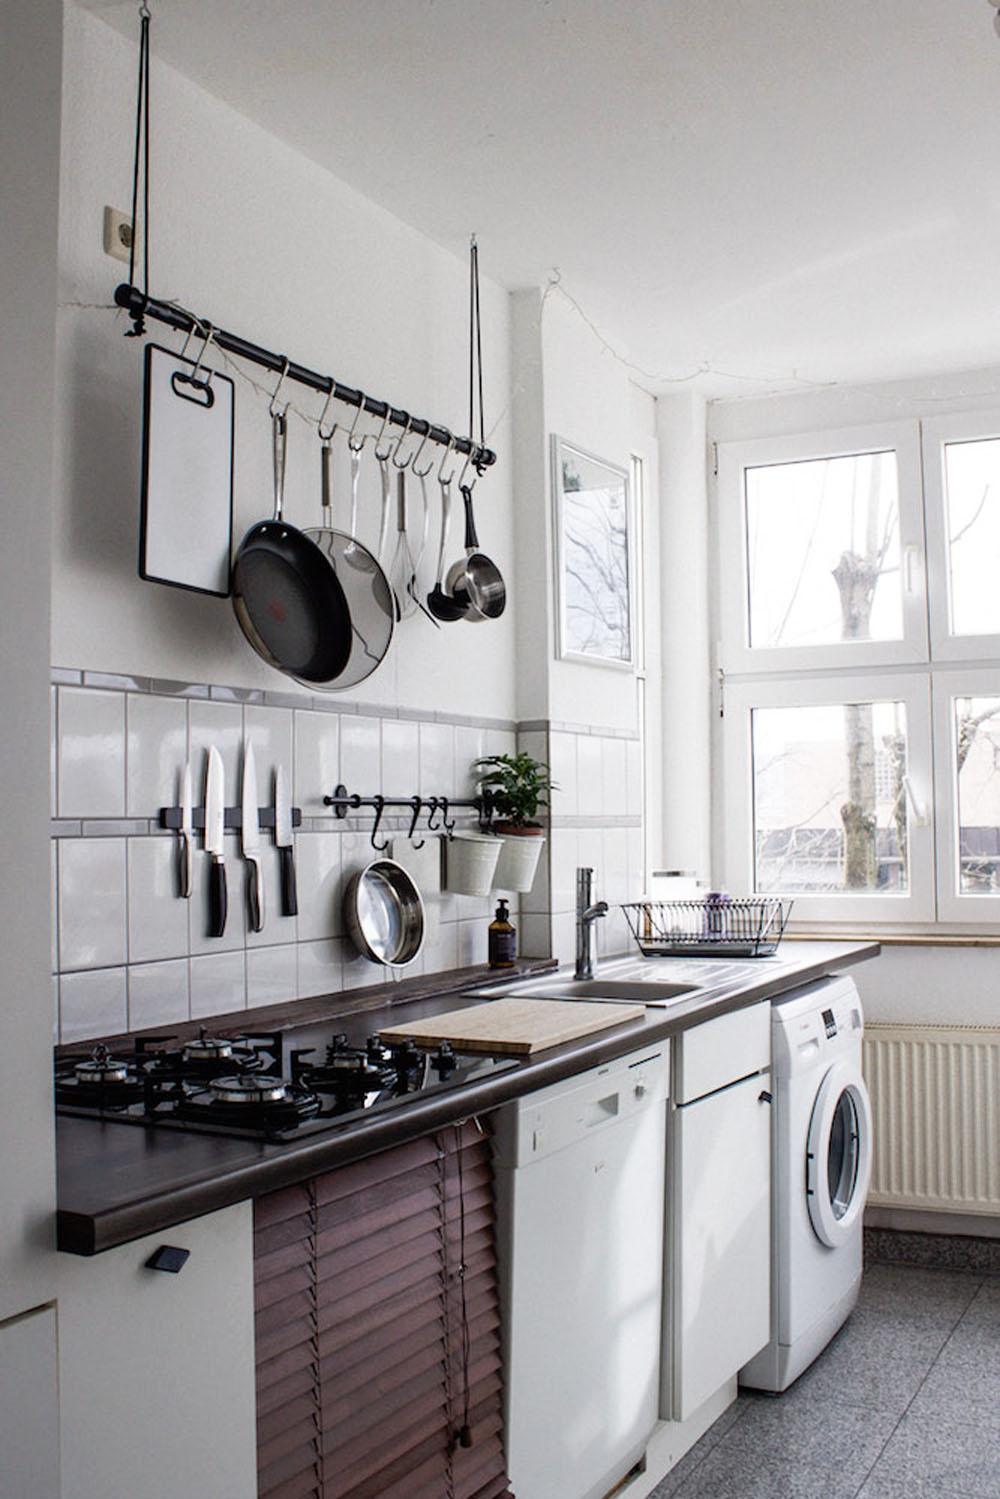 A sleek white kitchen with a magnet strip for knives above the stove and hanging rack for various pots and pans